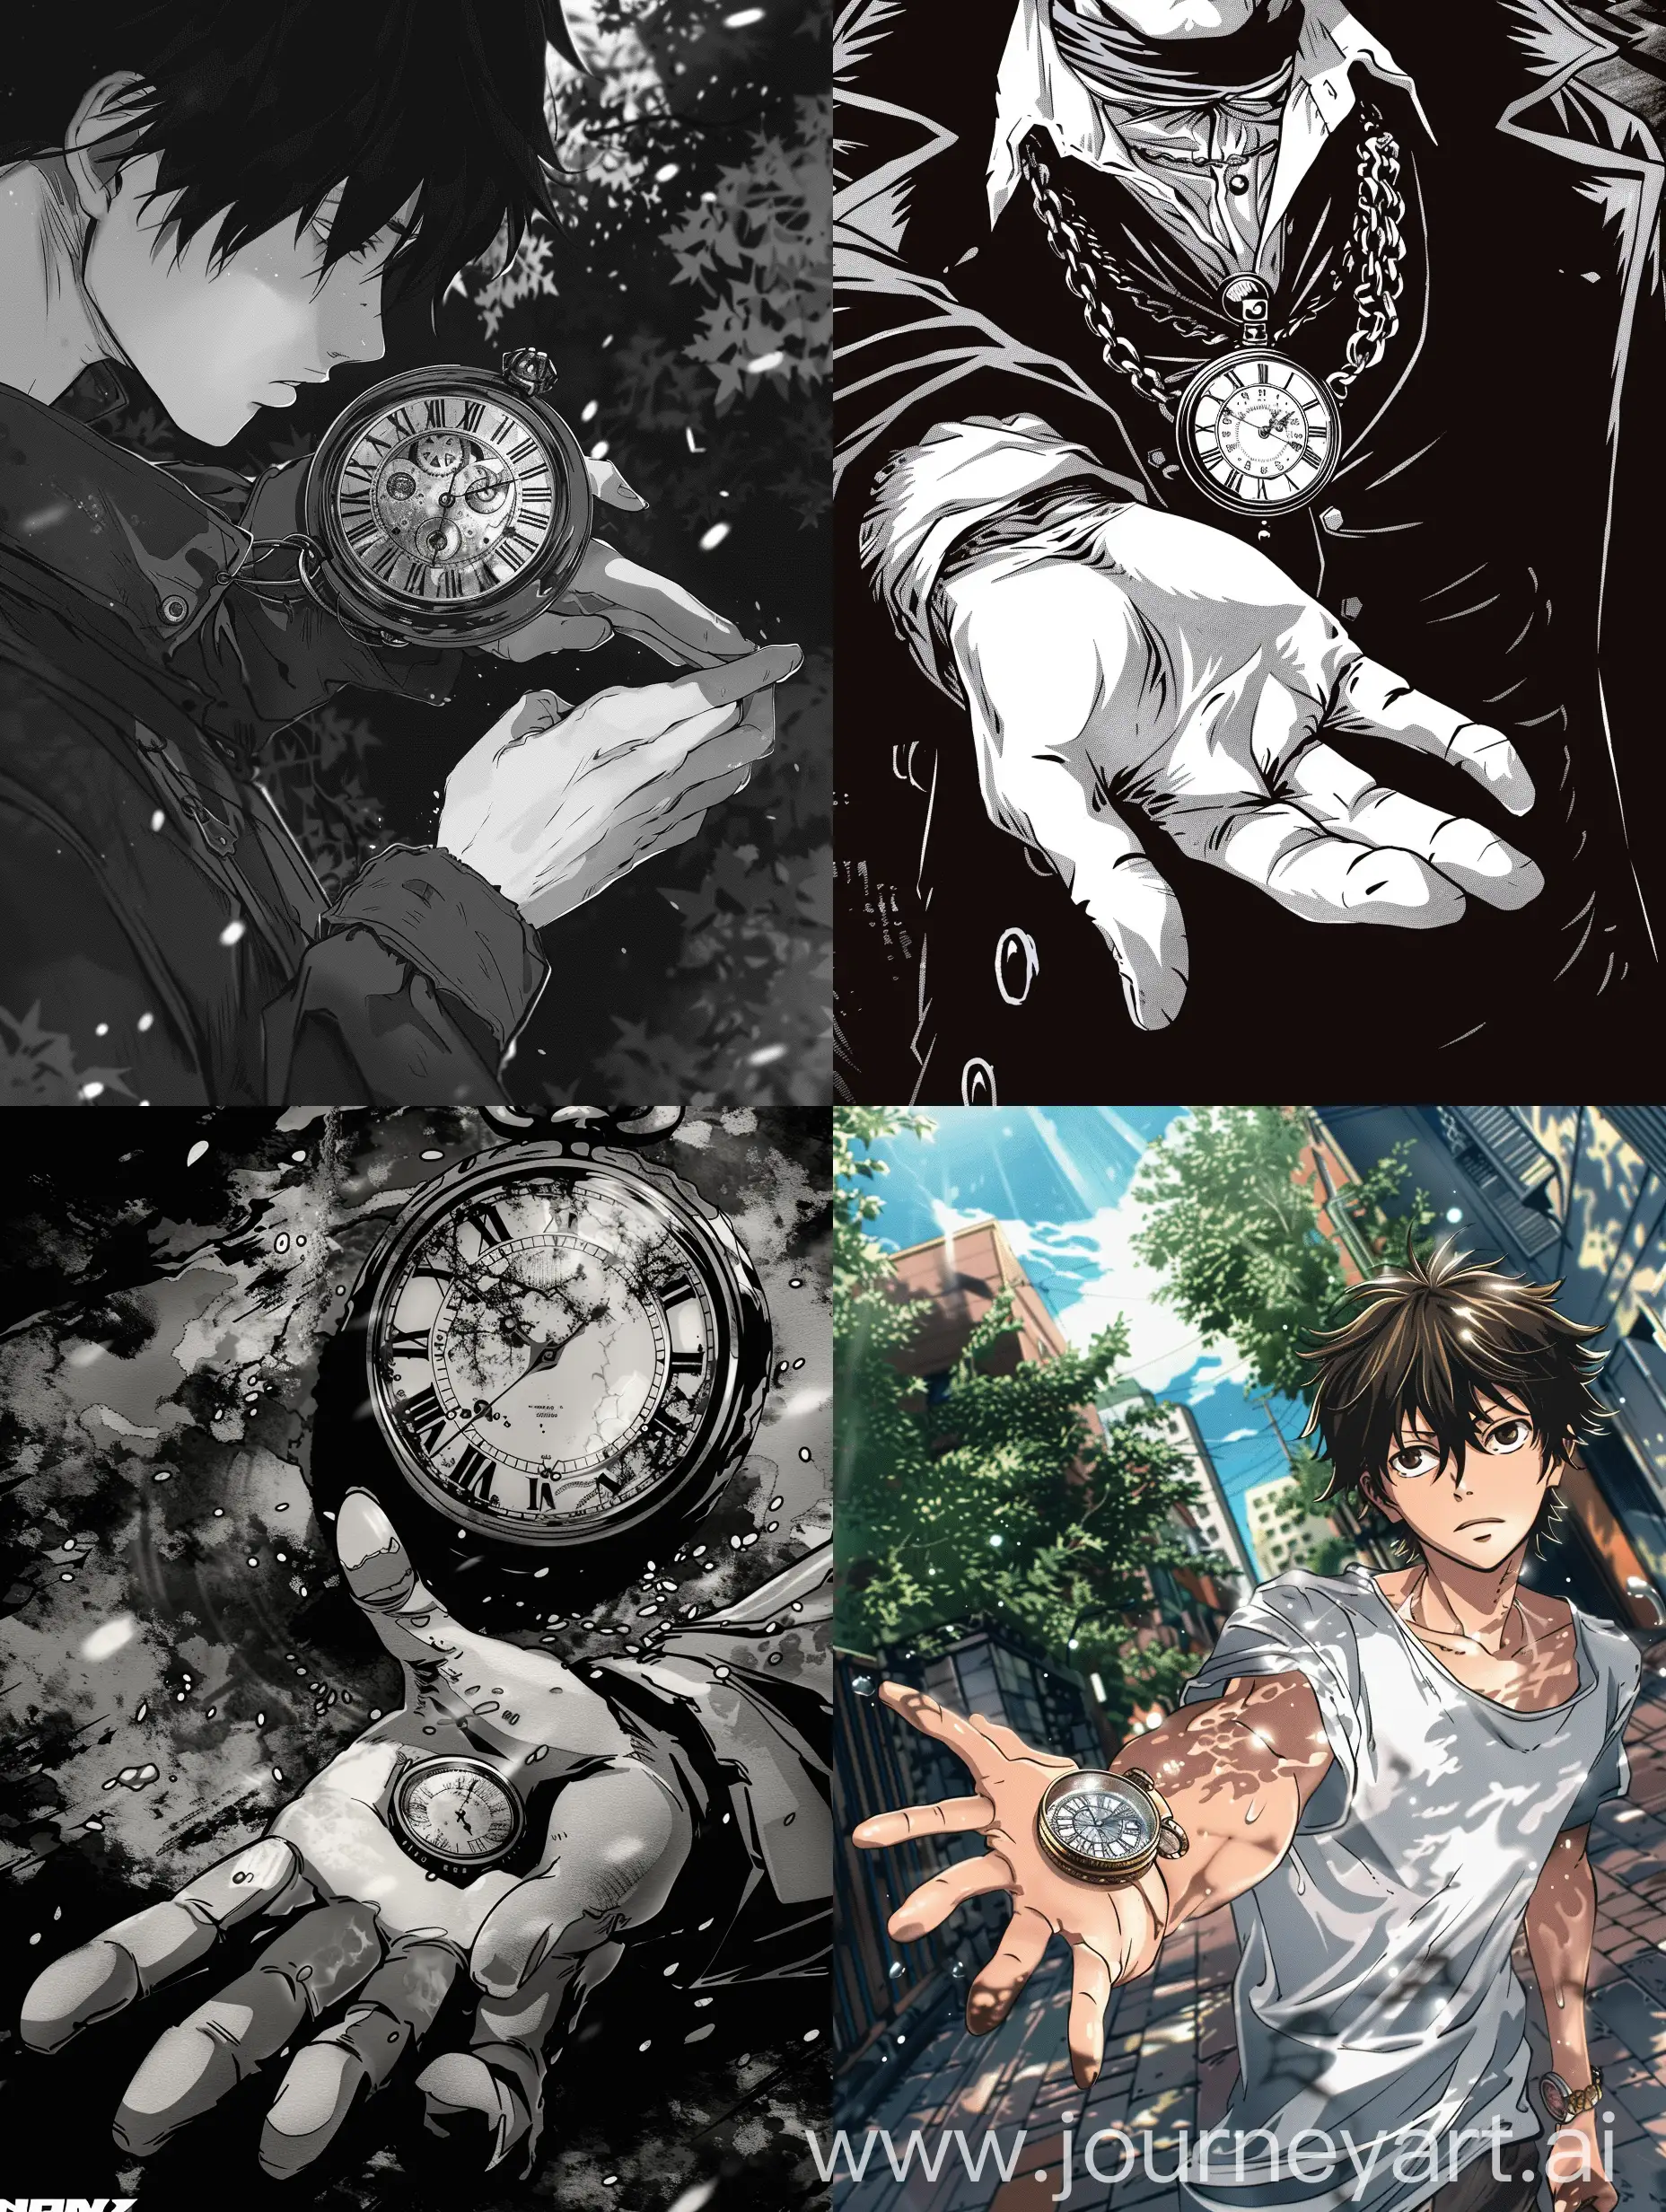 The time amulet in the guy's hand, manga style.